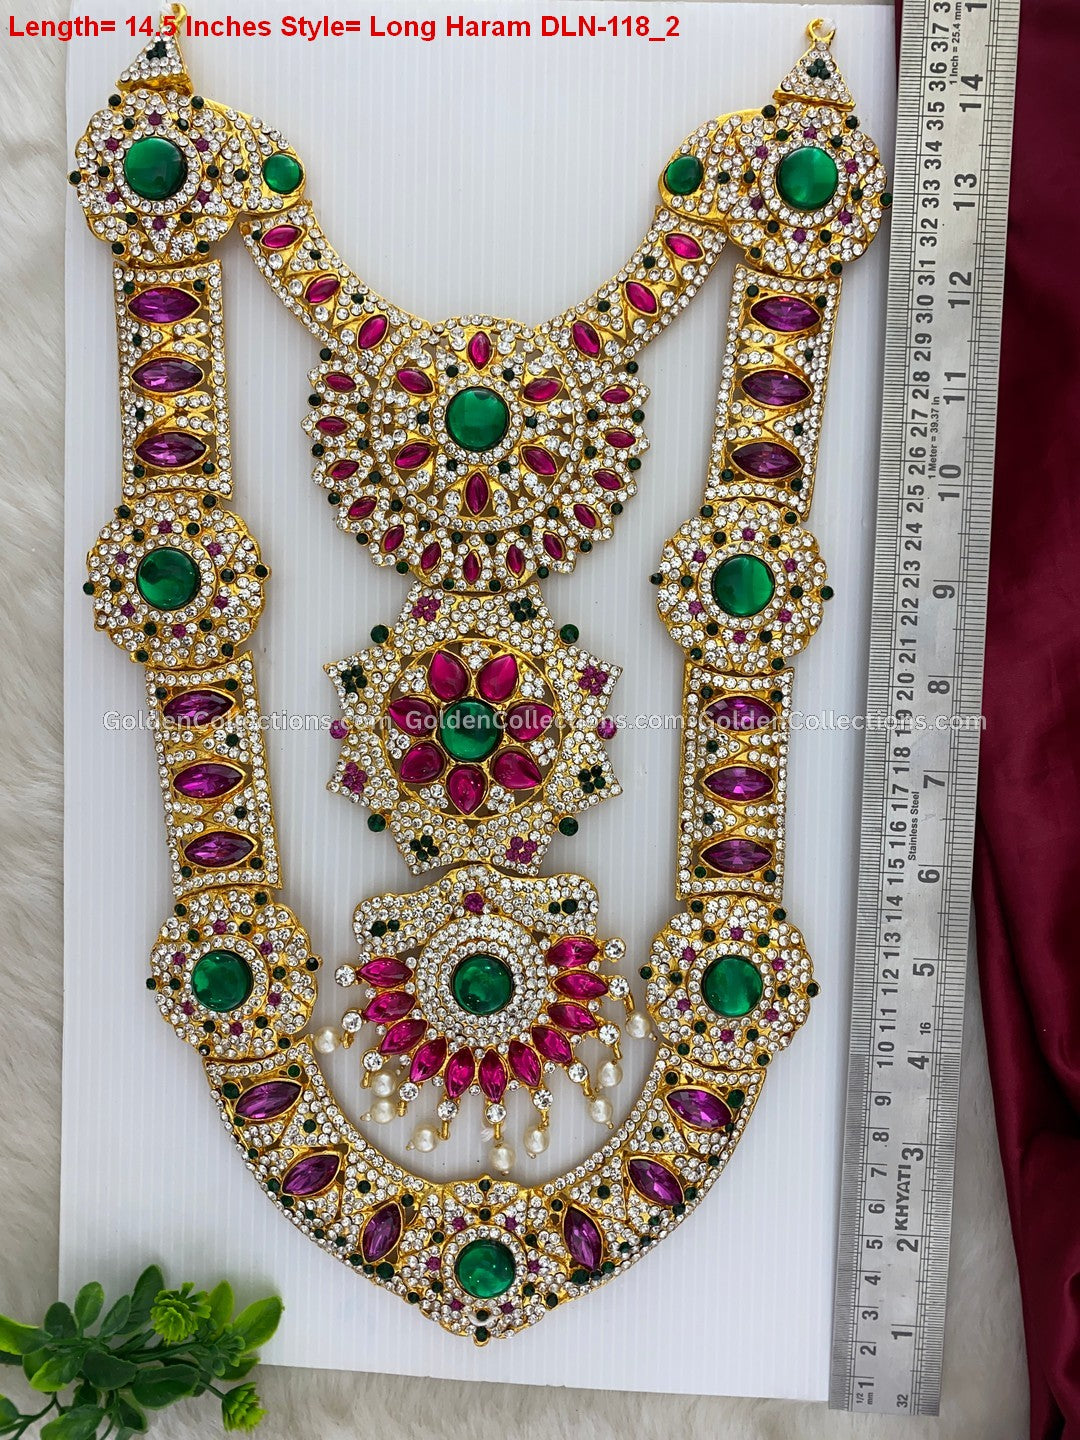 Floral Motifs Long Necklace: Blossom with Beauty DLN-118 2